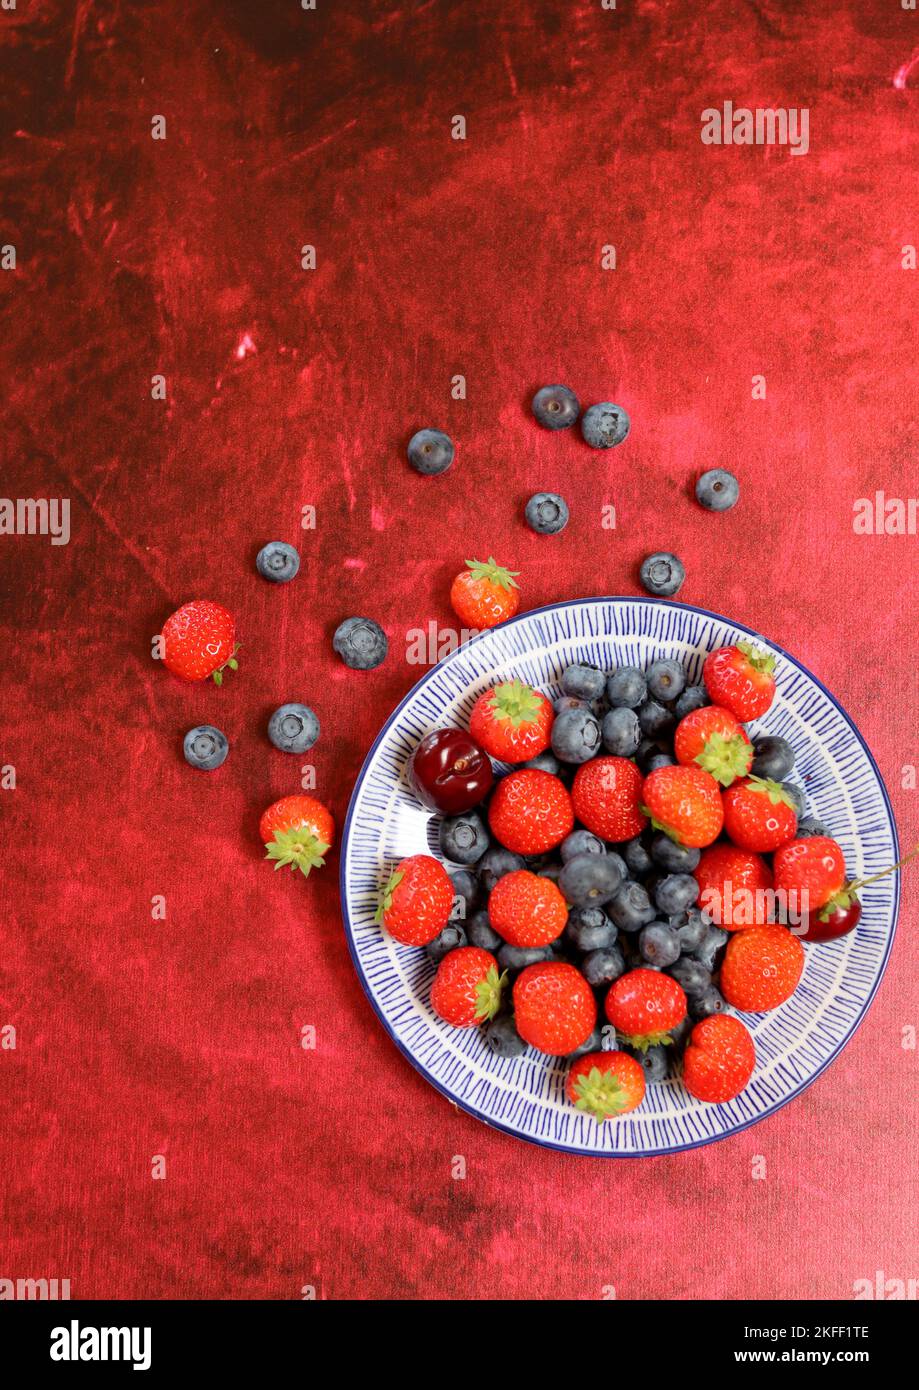 Vibrant colors of fresh summer berries. Strawberry, blueberry and sweet cherry on a blue ceramic plate. Red textured background with copy space. Stock Photo